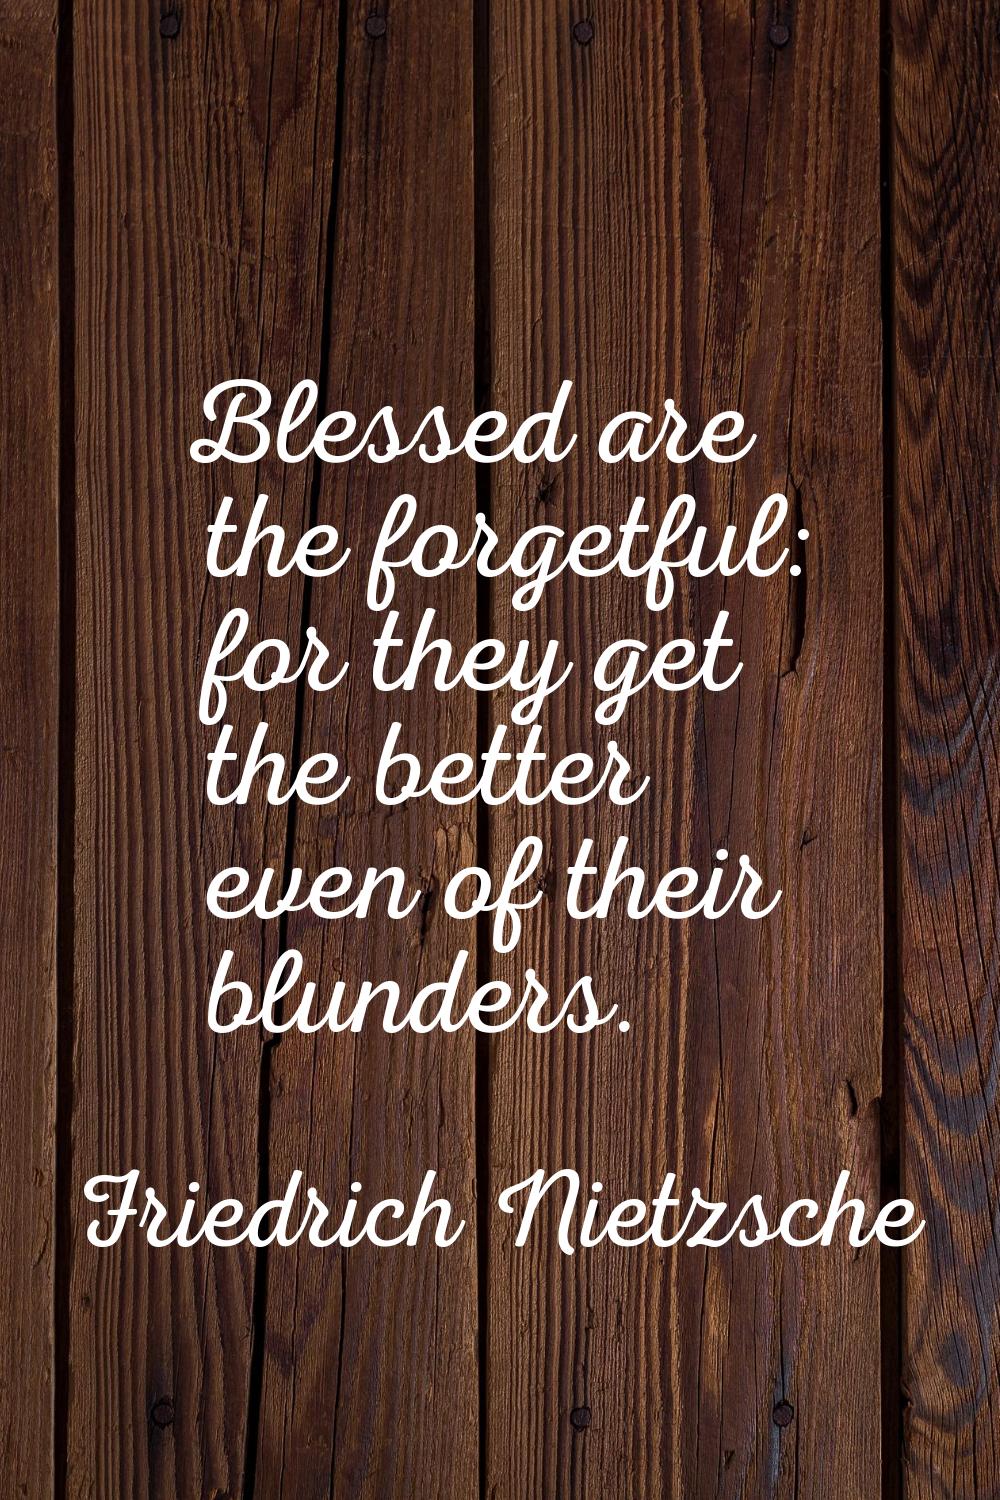 Blessed are the forgetful: for they get the better even of their blunders.